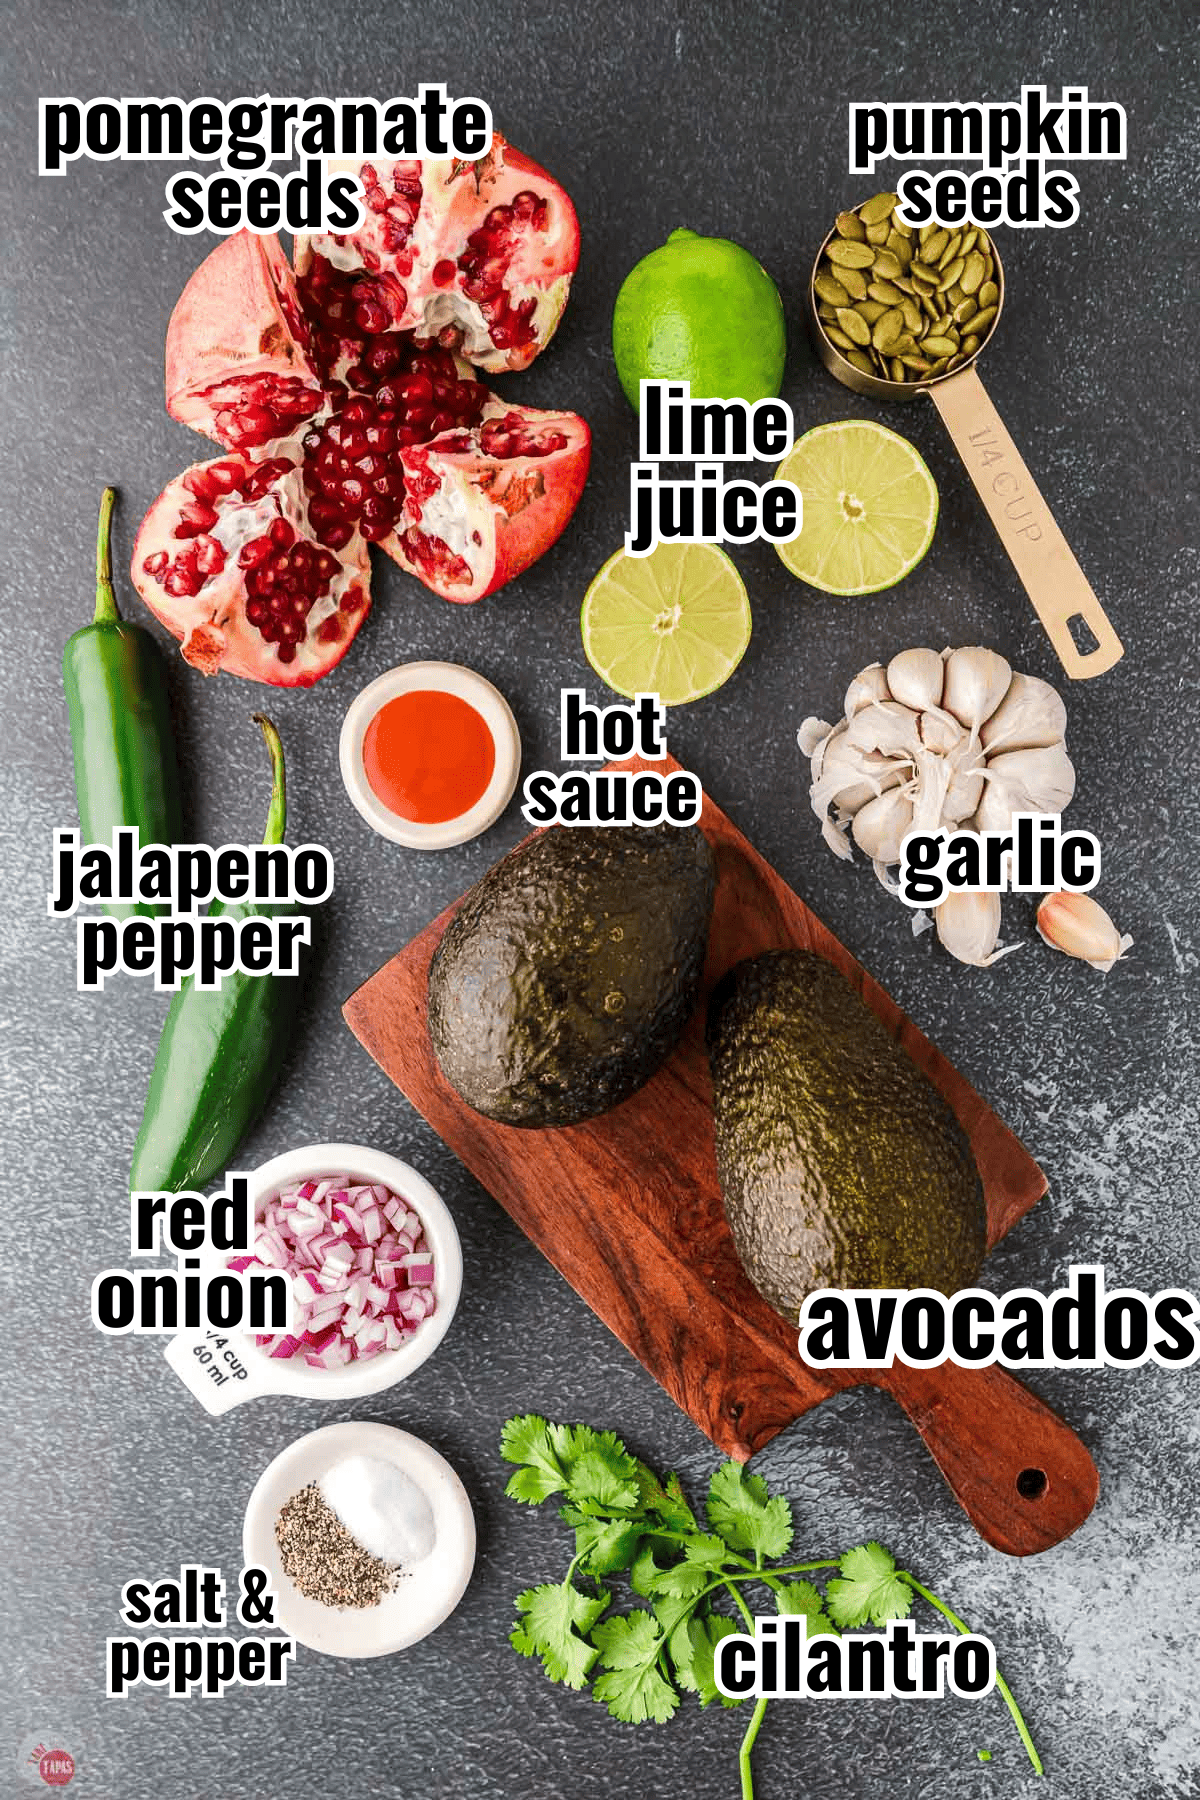 fresh ingredients are best when making homemade guacamole